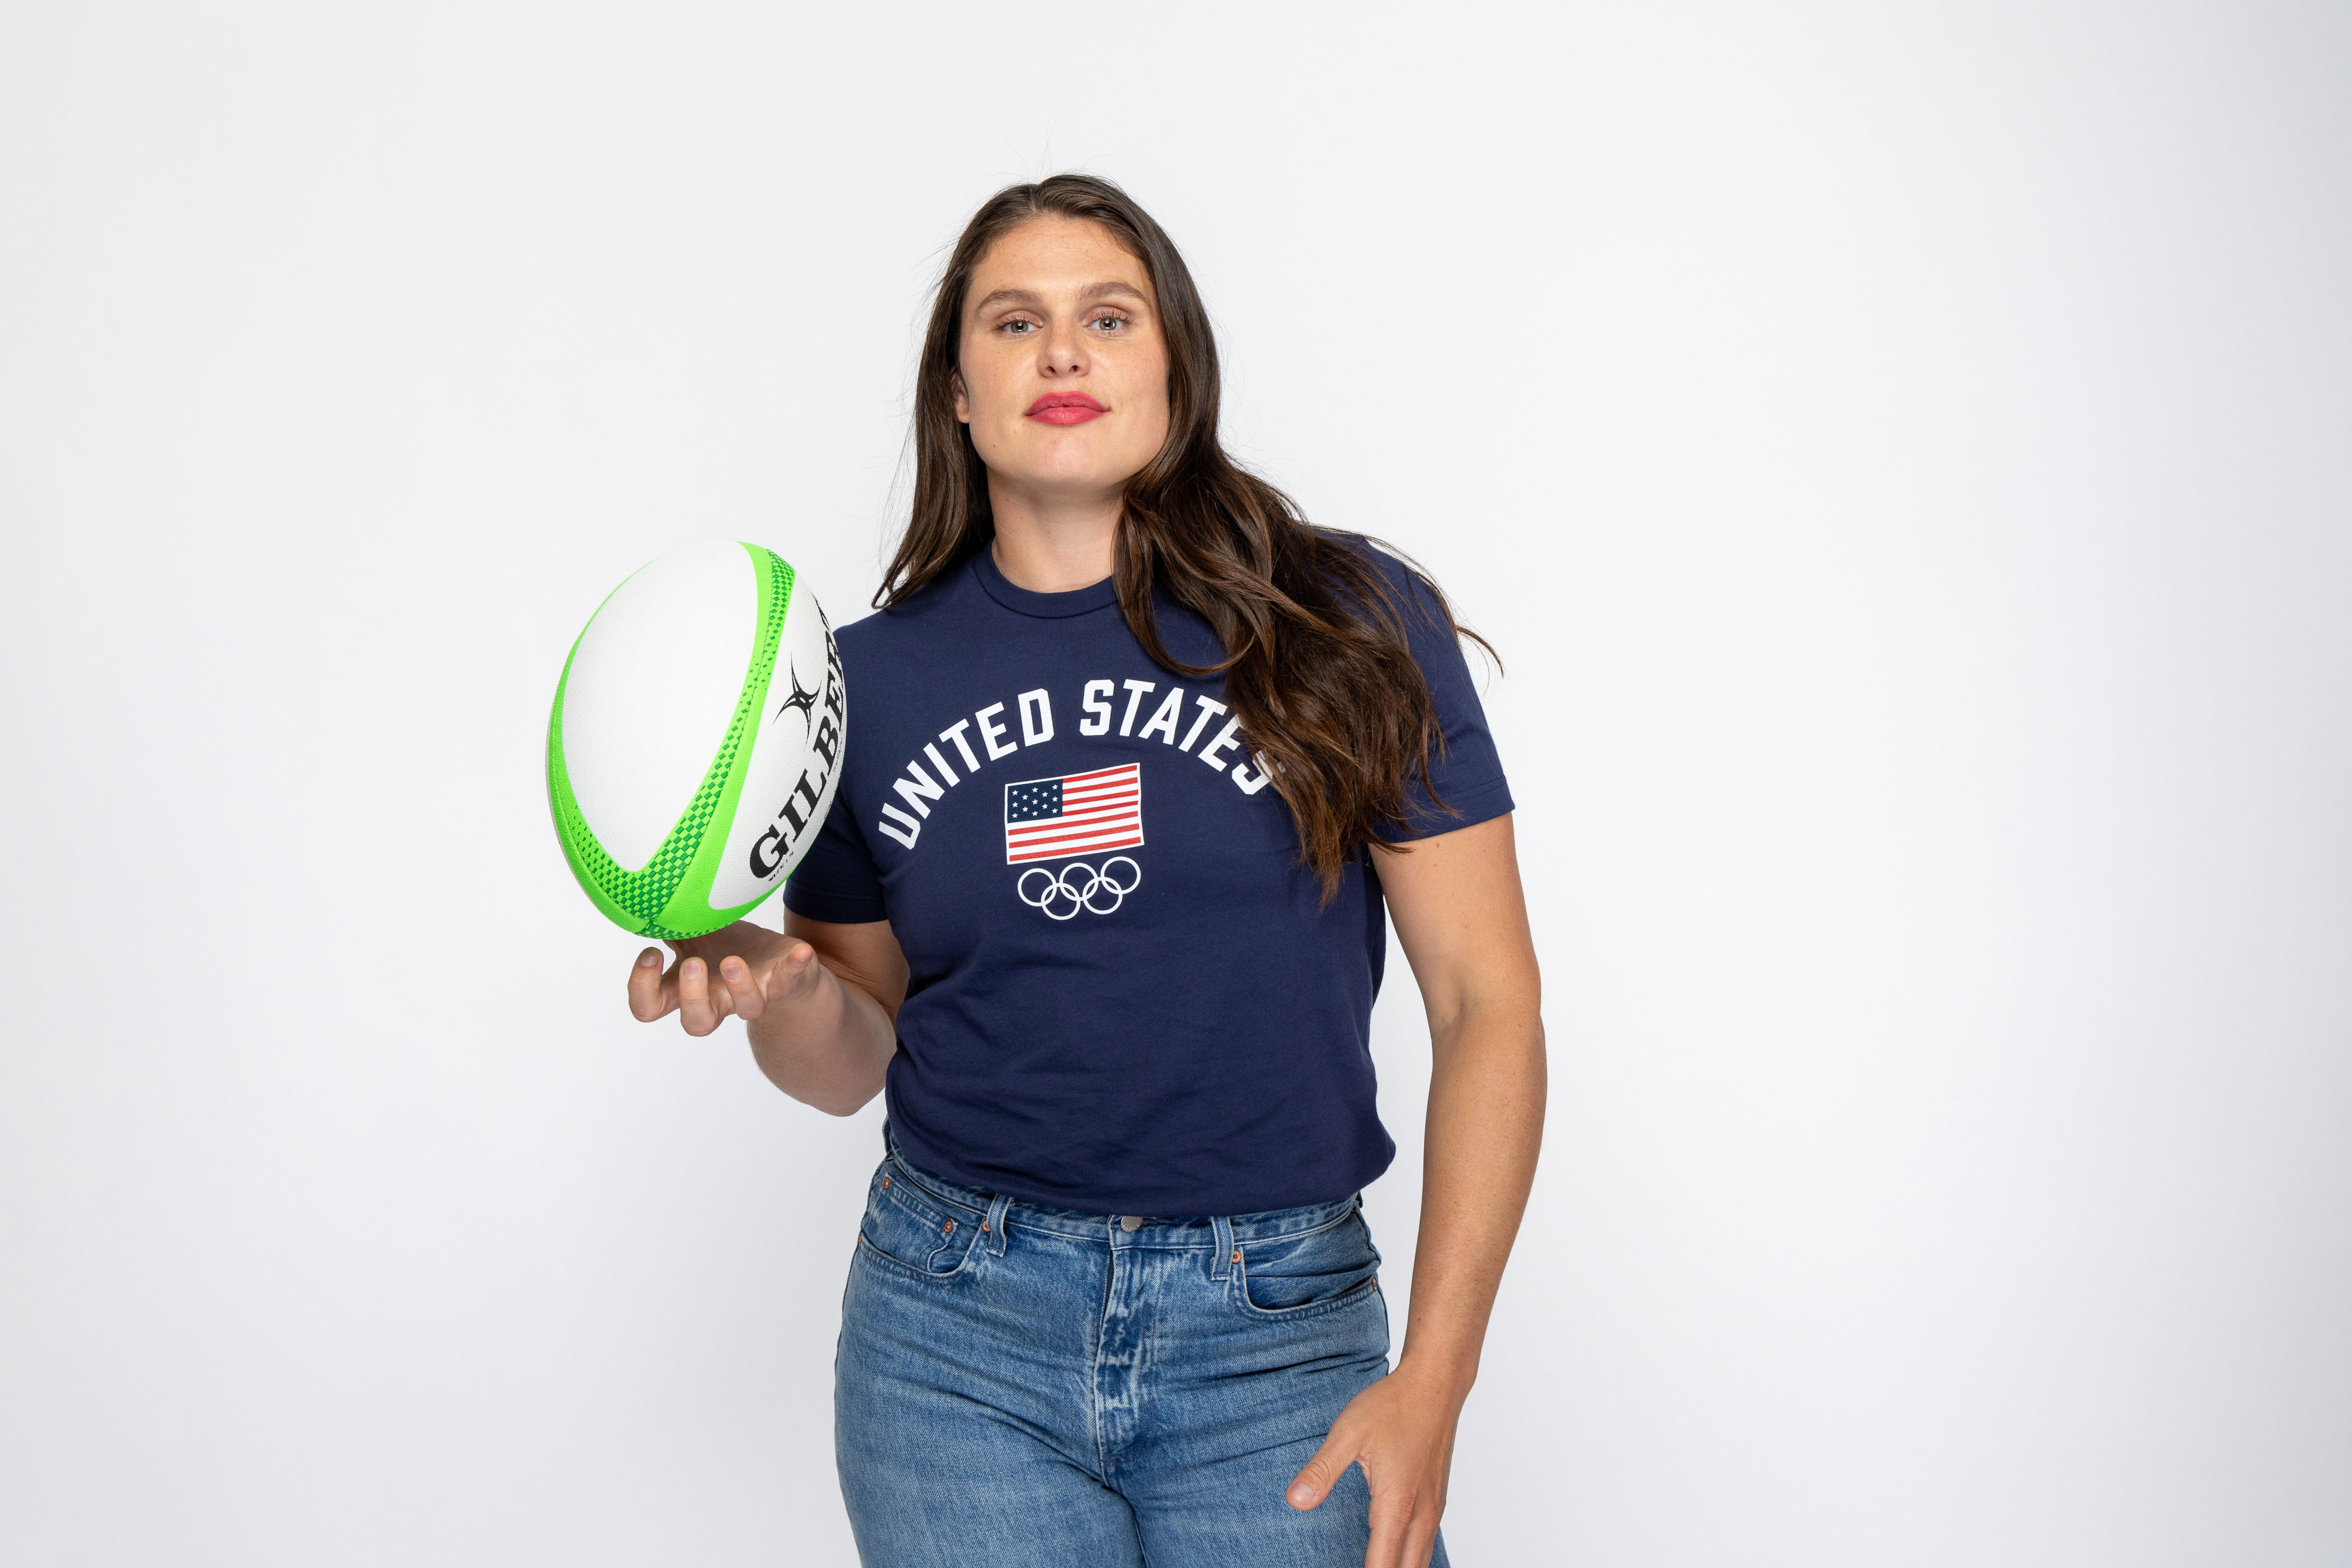 <p>Ilona Maher may not have known she wanted to become a rugby player until attending Quinnipiac University, but it seems she was made for the sport. Her <strong><a href="https://eagles.rugby/players/ilona-maher/1221">USA Rugby</a></strong> profile mentions how she successfully guided her team so well they earned <em>three</em> titles with the National Intercollegiate Rugby Association. </p><p>She made her debut at the 2020 Tokyo Olympics, and I'm sure we'll see her on the field alongside her team plenty during the 2024 Summer Olympics. </p><p>Like Brit + Co's content? <a href="https://www.msn.com/en-us/channel/source/BRITCO/sr-vid-mwh45mxjpbgutp55qr3ca3bnmhxae80xpqj0vw80yesb5g0h5q2a?cvid=6efac0aec71d460989f862c7f33ea985&ei=106">Be sure to follow us for more! </a> </p>